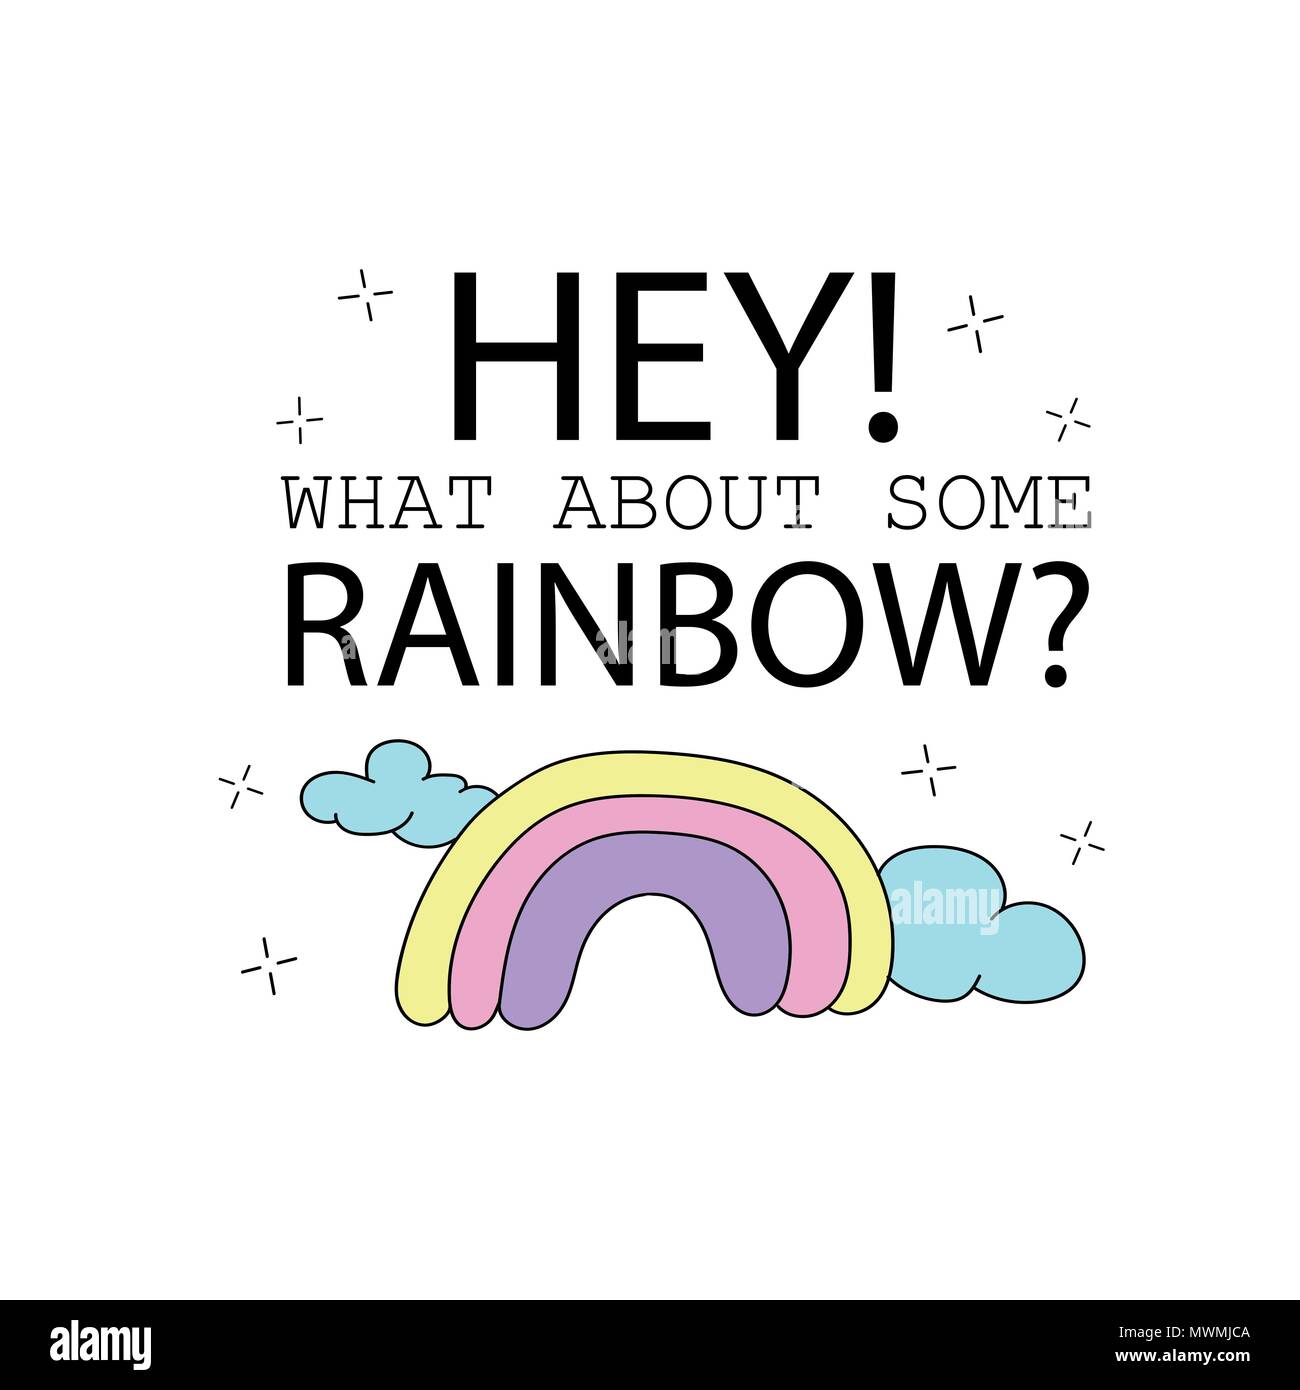 What about some rainbow - quote and cute rainbow drawing Stock ...